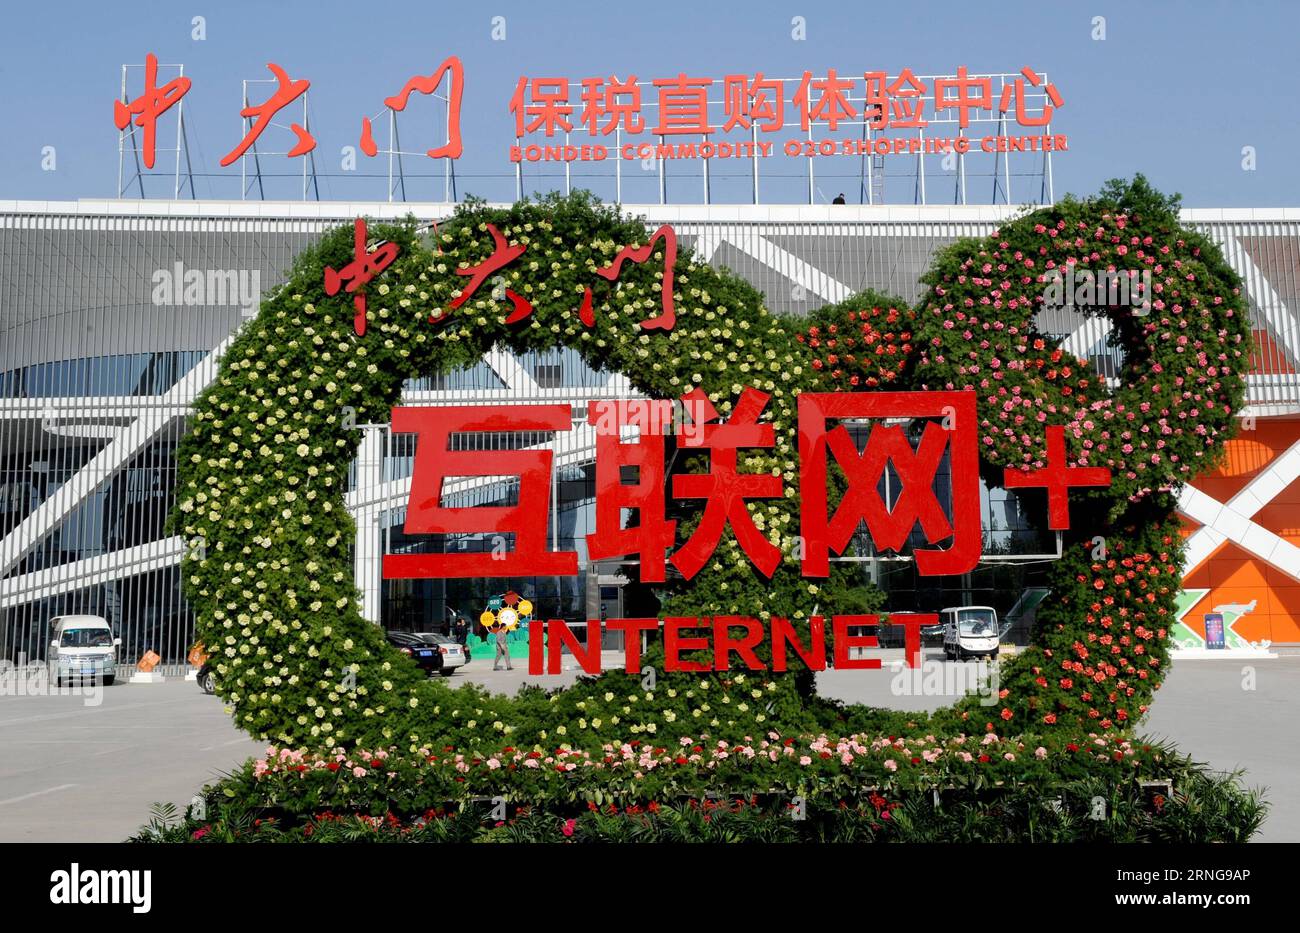 (160914) -- BEIJING, Sept. 14, 2016 -- File photo taken on April 14, 2015 shows the gate of the Zhongdamen Bonded Commodity Online-to-offline (O2O) Shopping Center in Zhengzhou, capital of central China s Henan Province. Zhengzhou is one of the Chinese cities having direct cargo trains to Europe. Starting from Zhengzhou, a logistics center and transport hub in Henan, the 10,214-kilometer Zhengzhou-Europe international shuttle train crosses the border at the Alataw Pass in Xinjiang before passing through Kazakhstan, Russia, Belarus and Poland on its way to Germany s Hamburg. The Zhengzhou-Europ Stock Photo